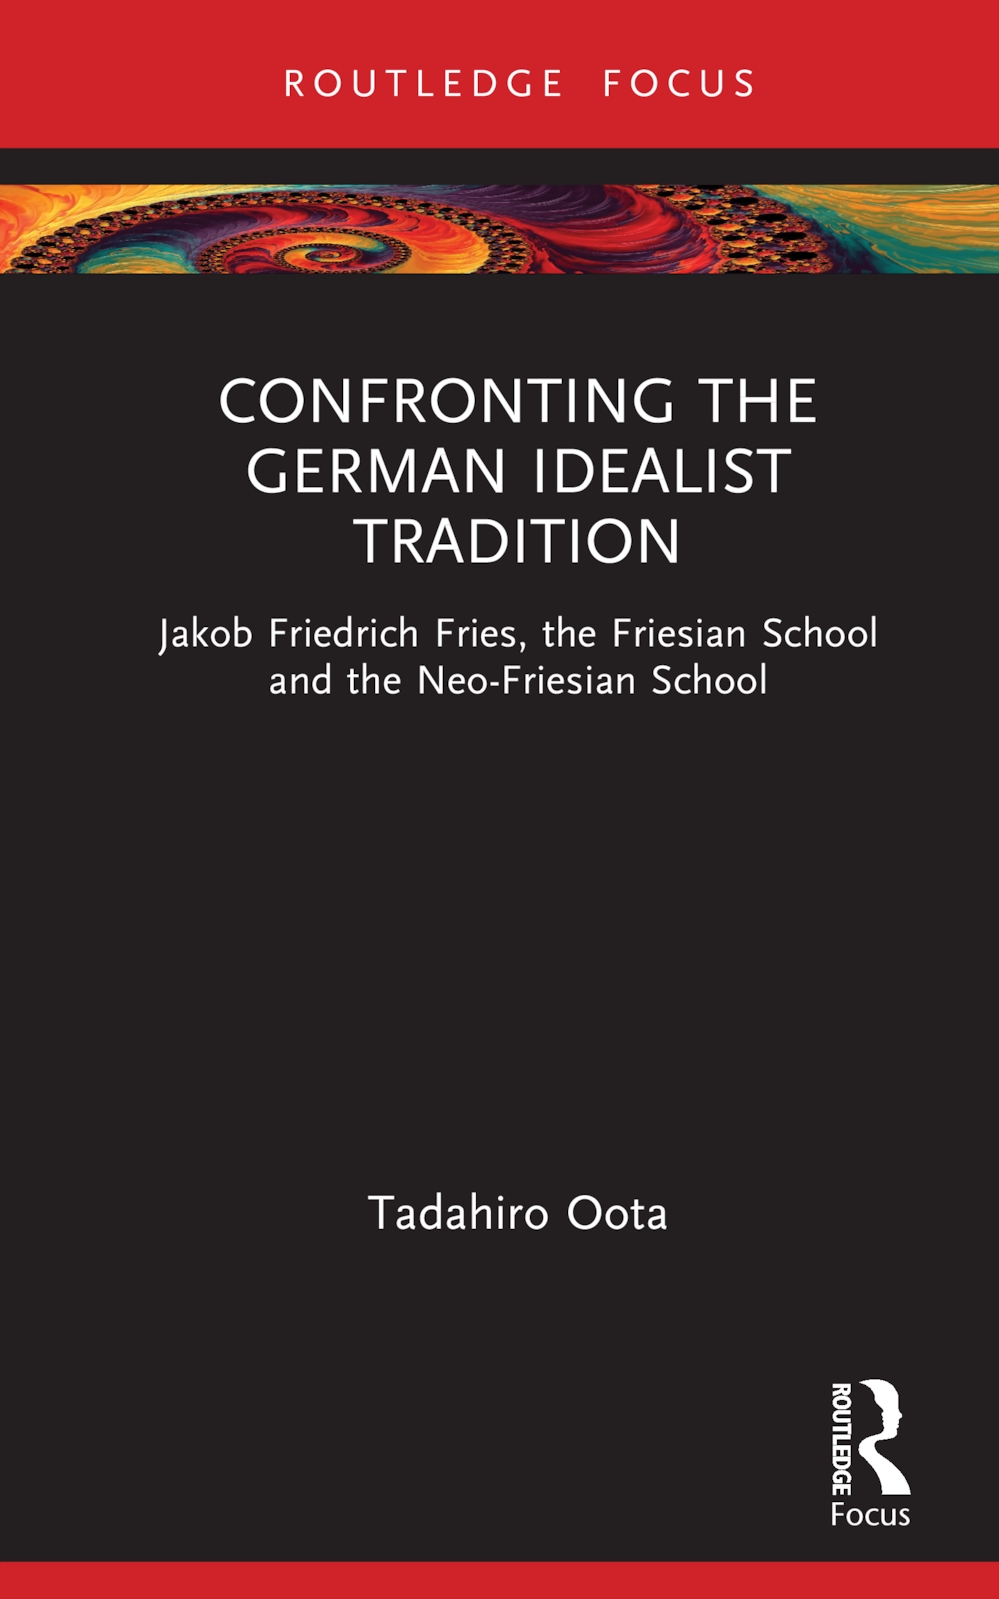 Confronting the German Idealist Tradition: Jakob Friedrich Fries, the Friesian School and the Neo-Friesian School